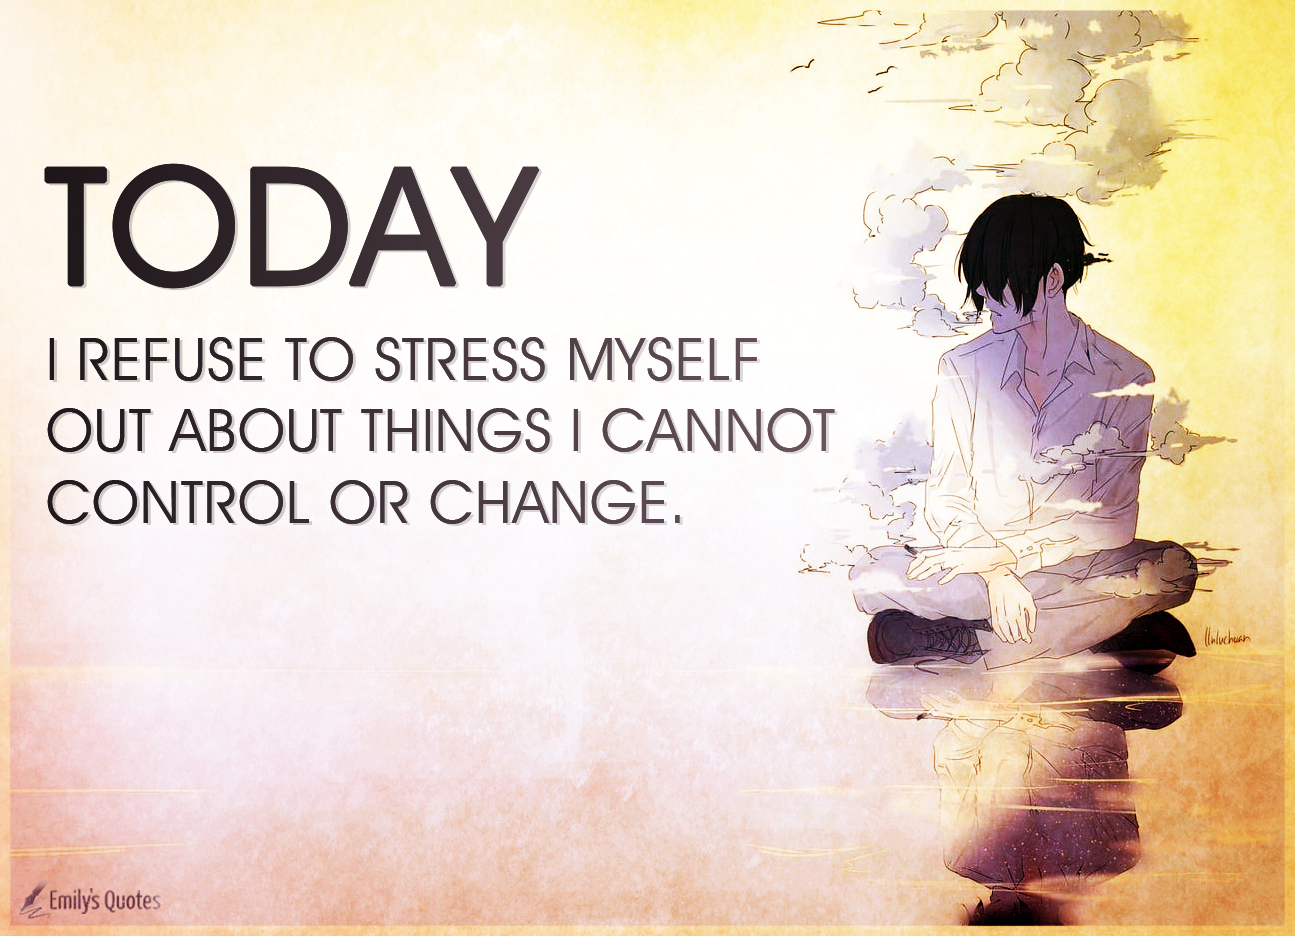 Today I refuse to stress myself out about things I cannot control or change